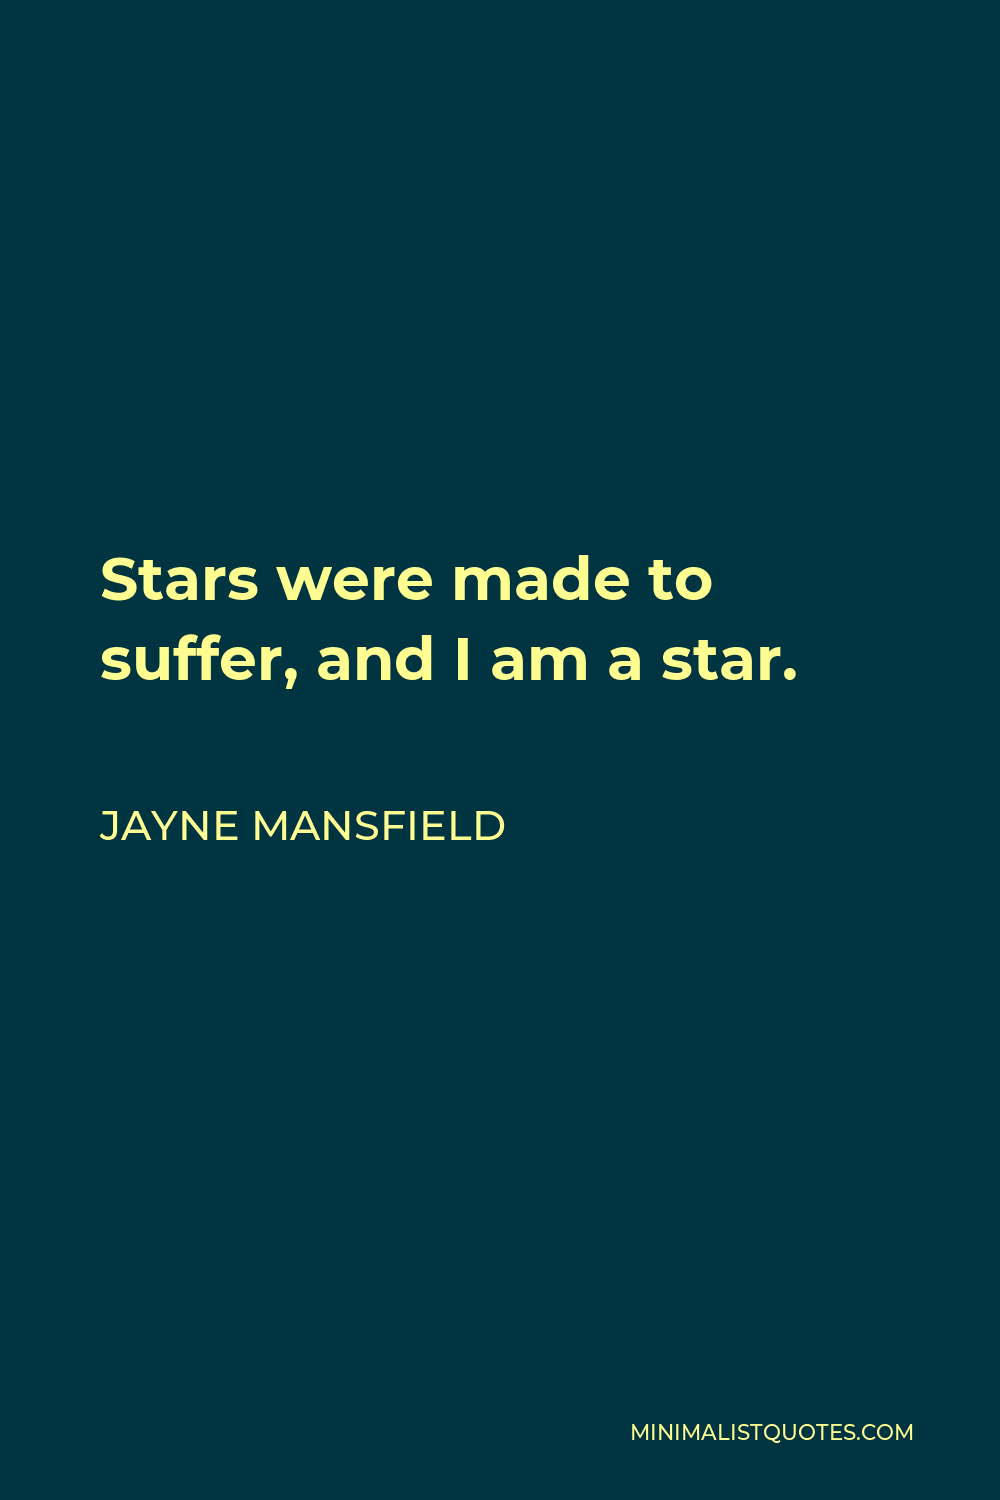 Jayne Mansfield Quote - Stars were made to suffer, and I am a star.